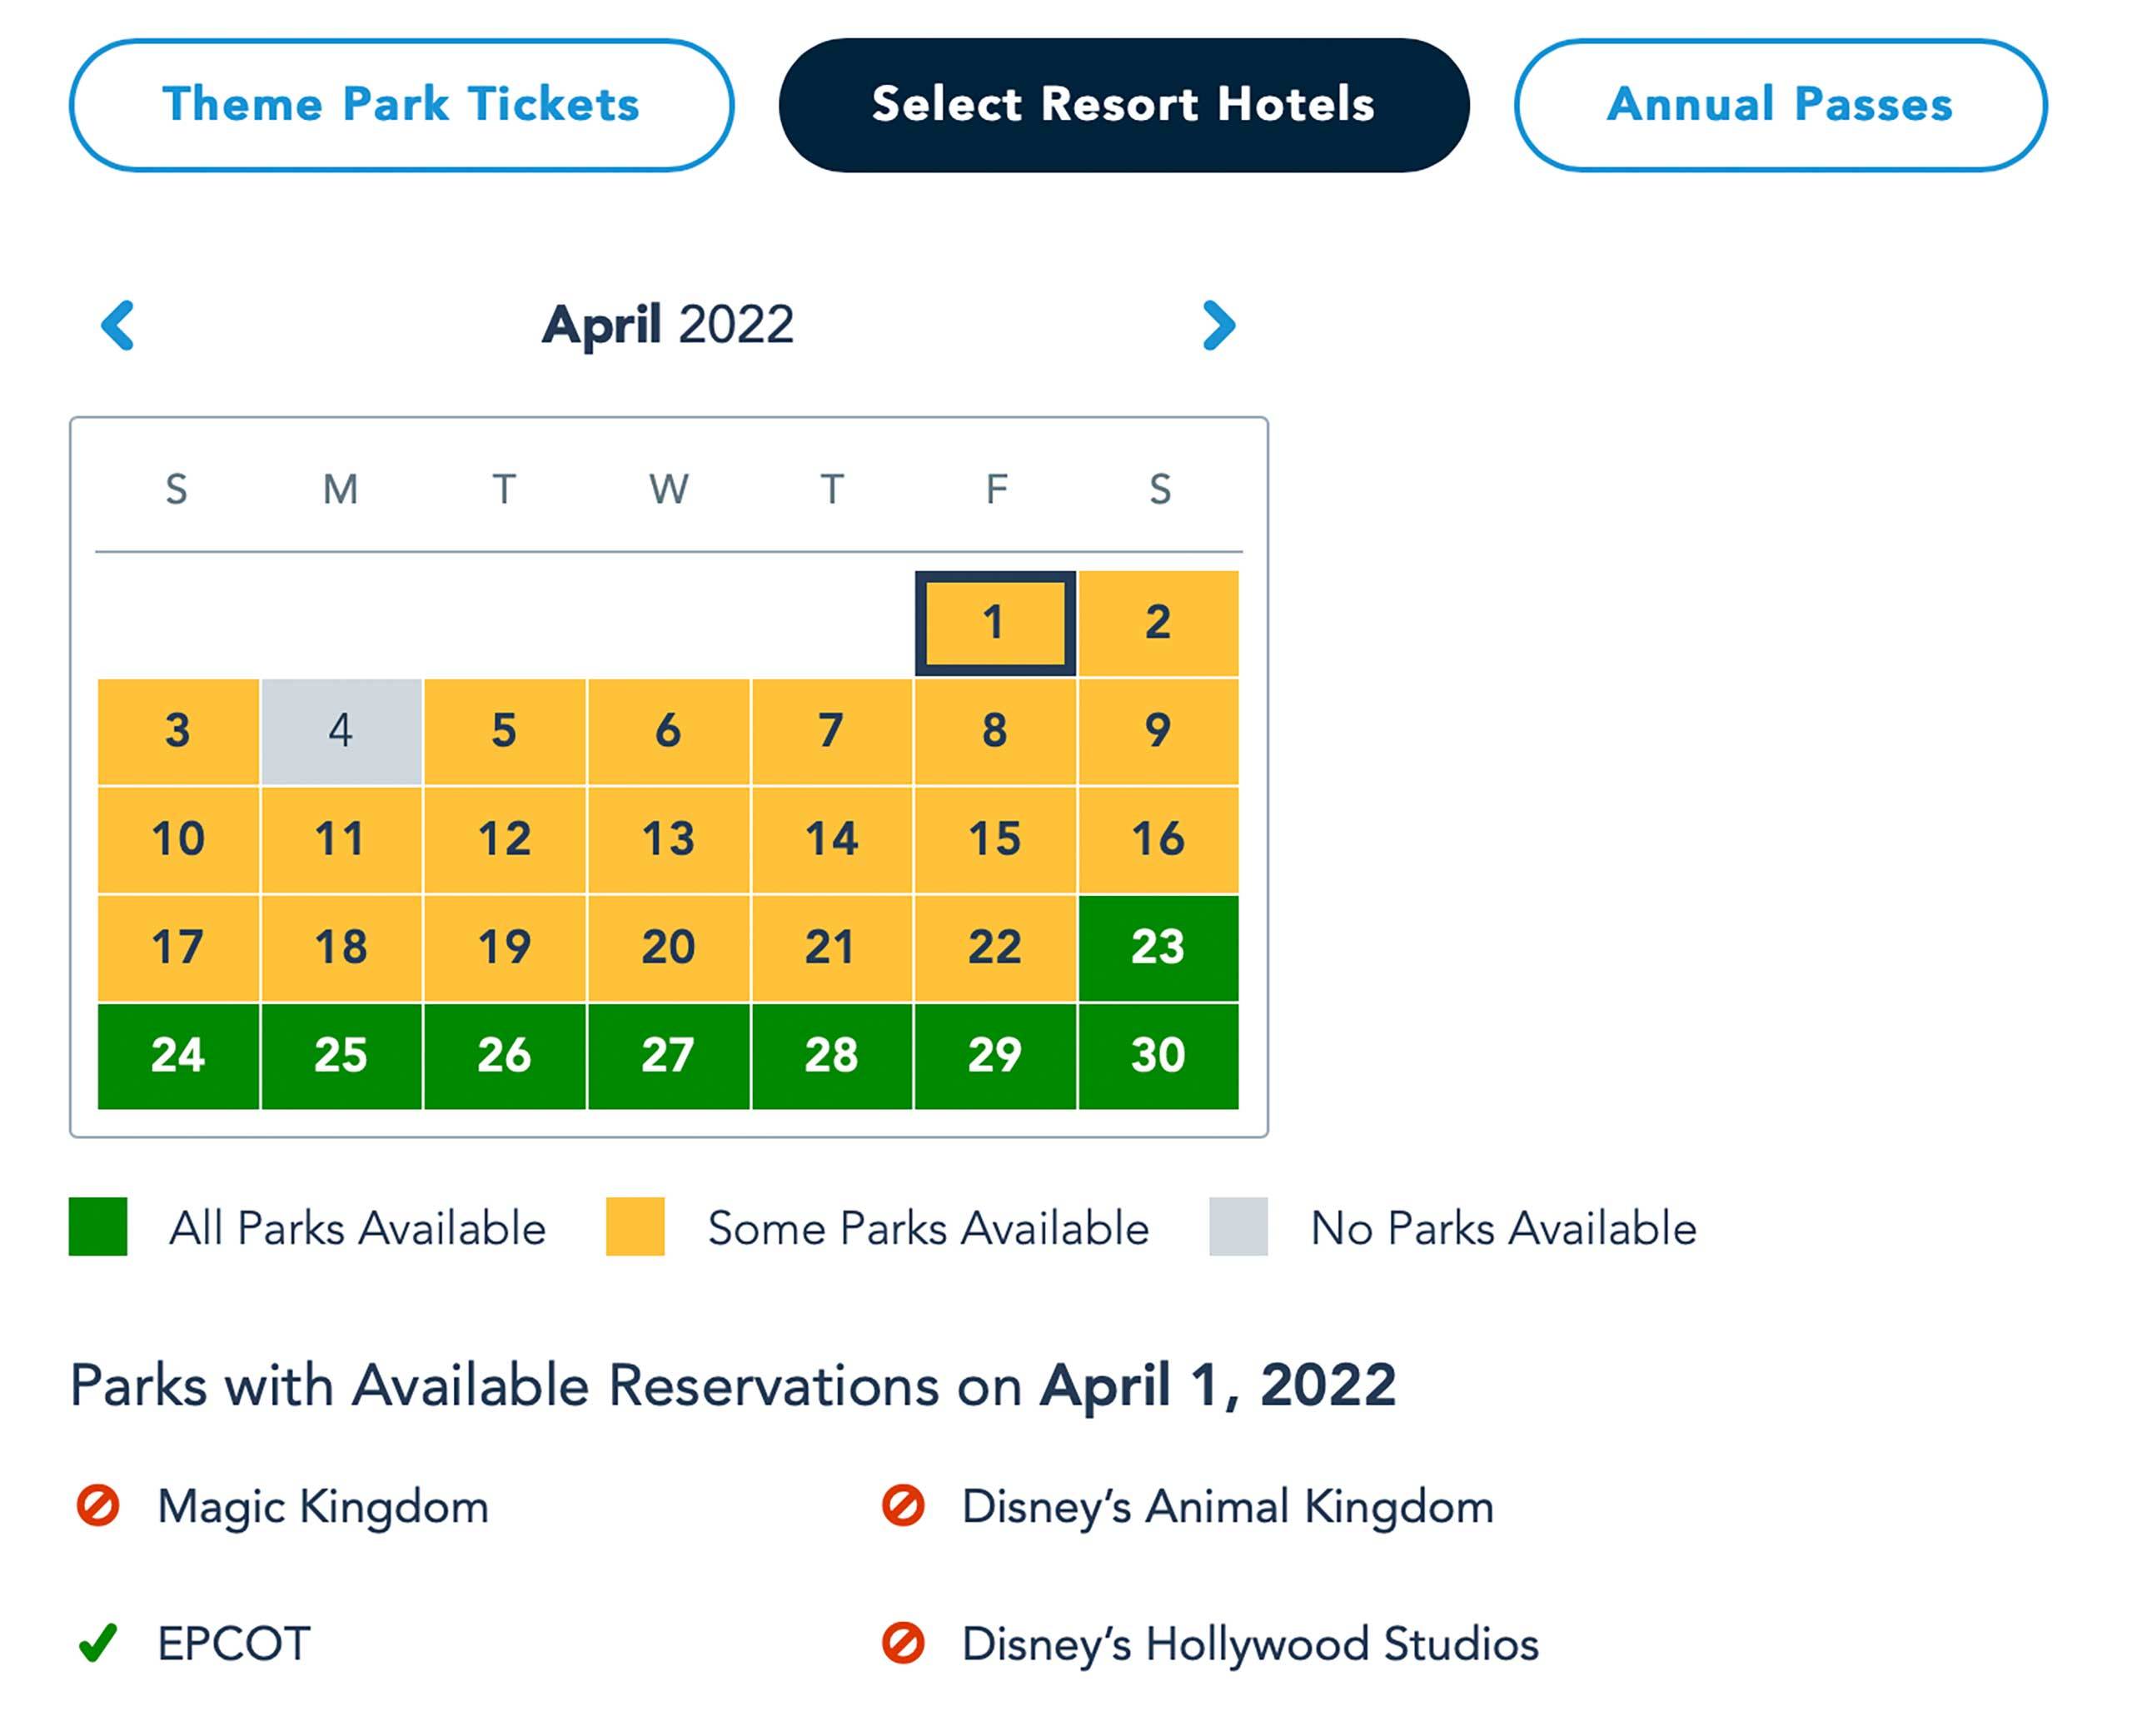 Walt Disney World Park Pass availability extremely limited during April 2022